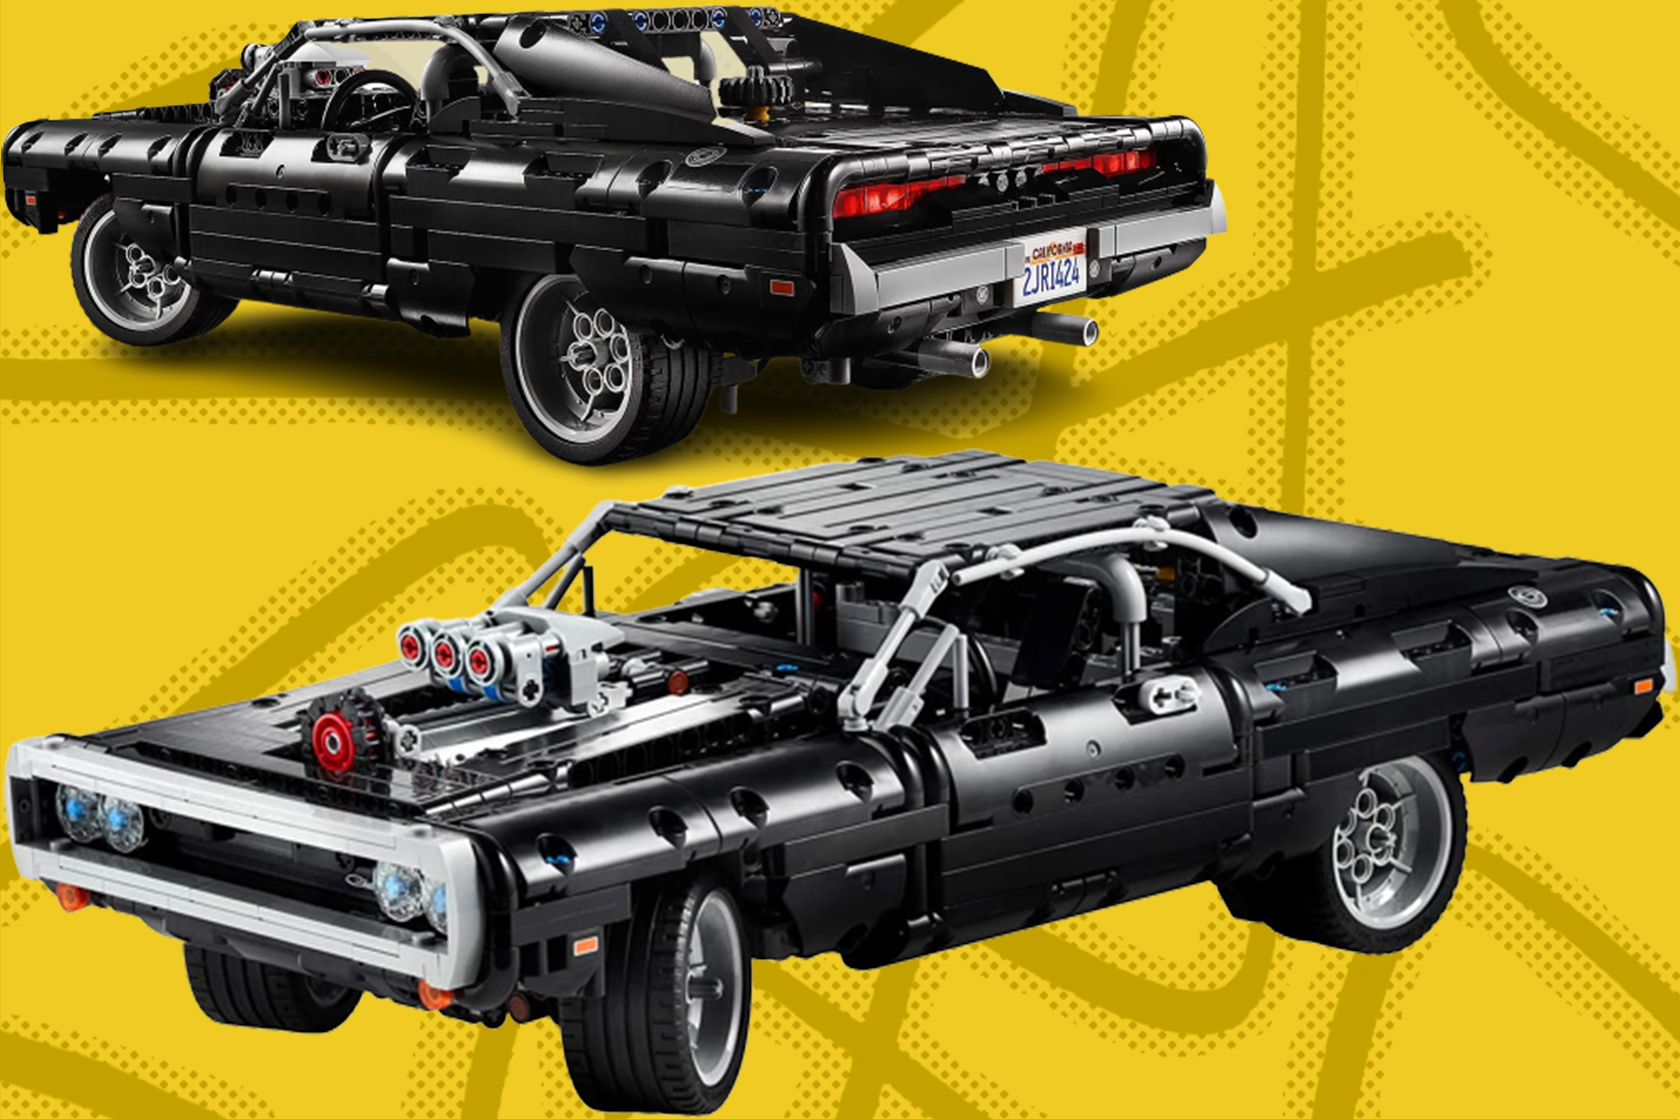 Build your own version of Dom's Dodge Charger from 'Fast & Furious' with  this LEGO set